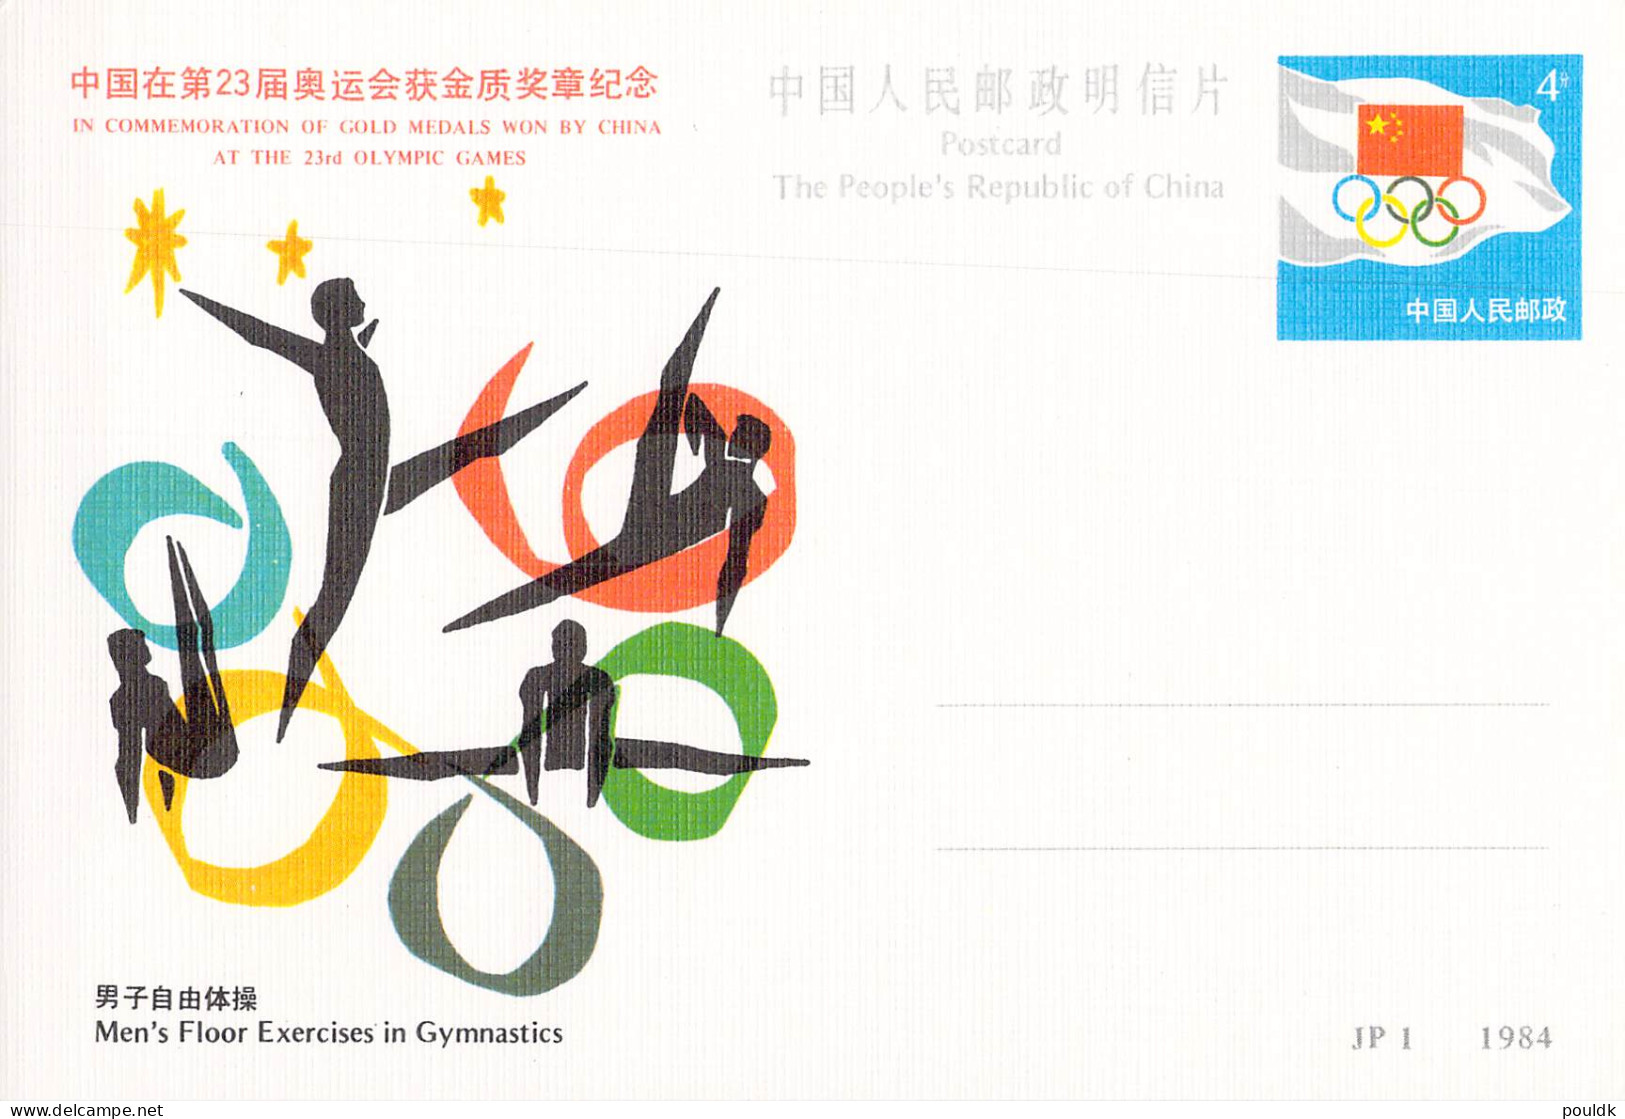 Olympic Games in Los Angeles 1984 - Nine Chinese postal stationaries commerating Gold Medals mint